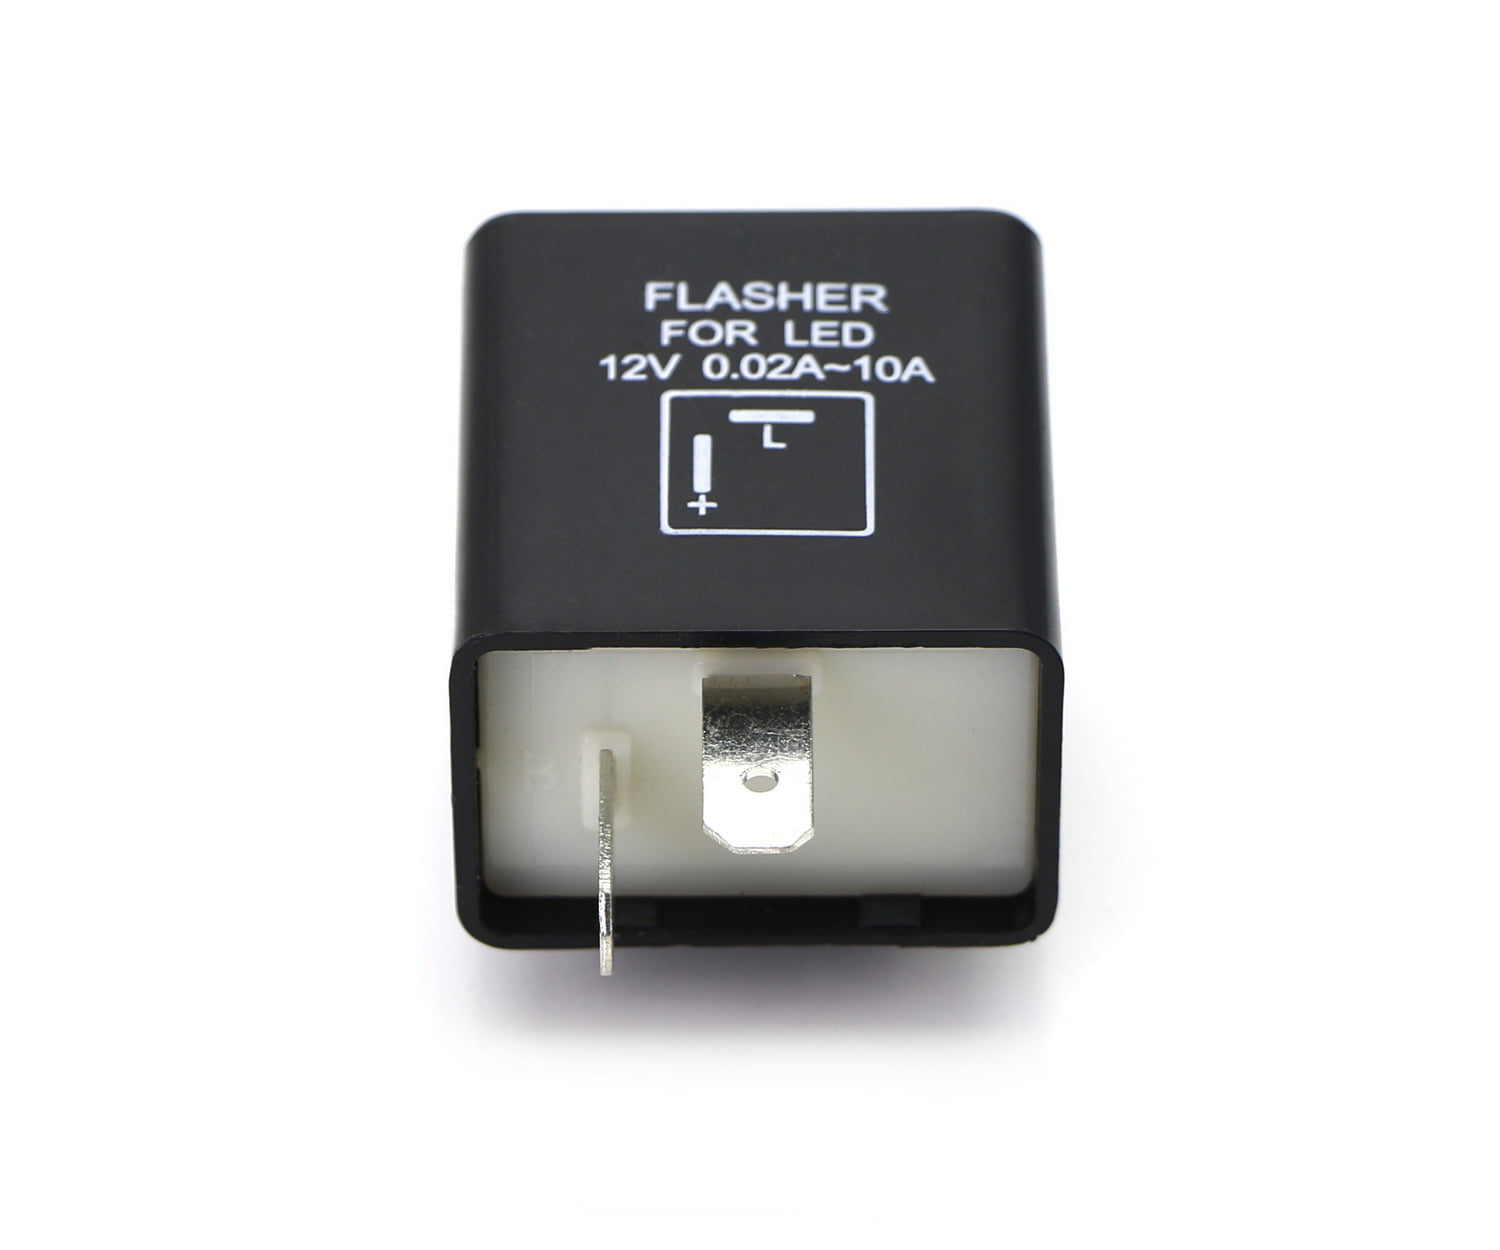 Dewhel 12V 0.02A-10A 2-Pin CF-12 Electronic LED Flasher Relay Fix For Turn Signal Light Fast Hyper Flash